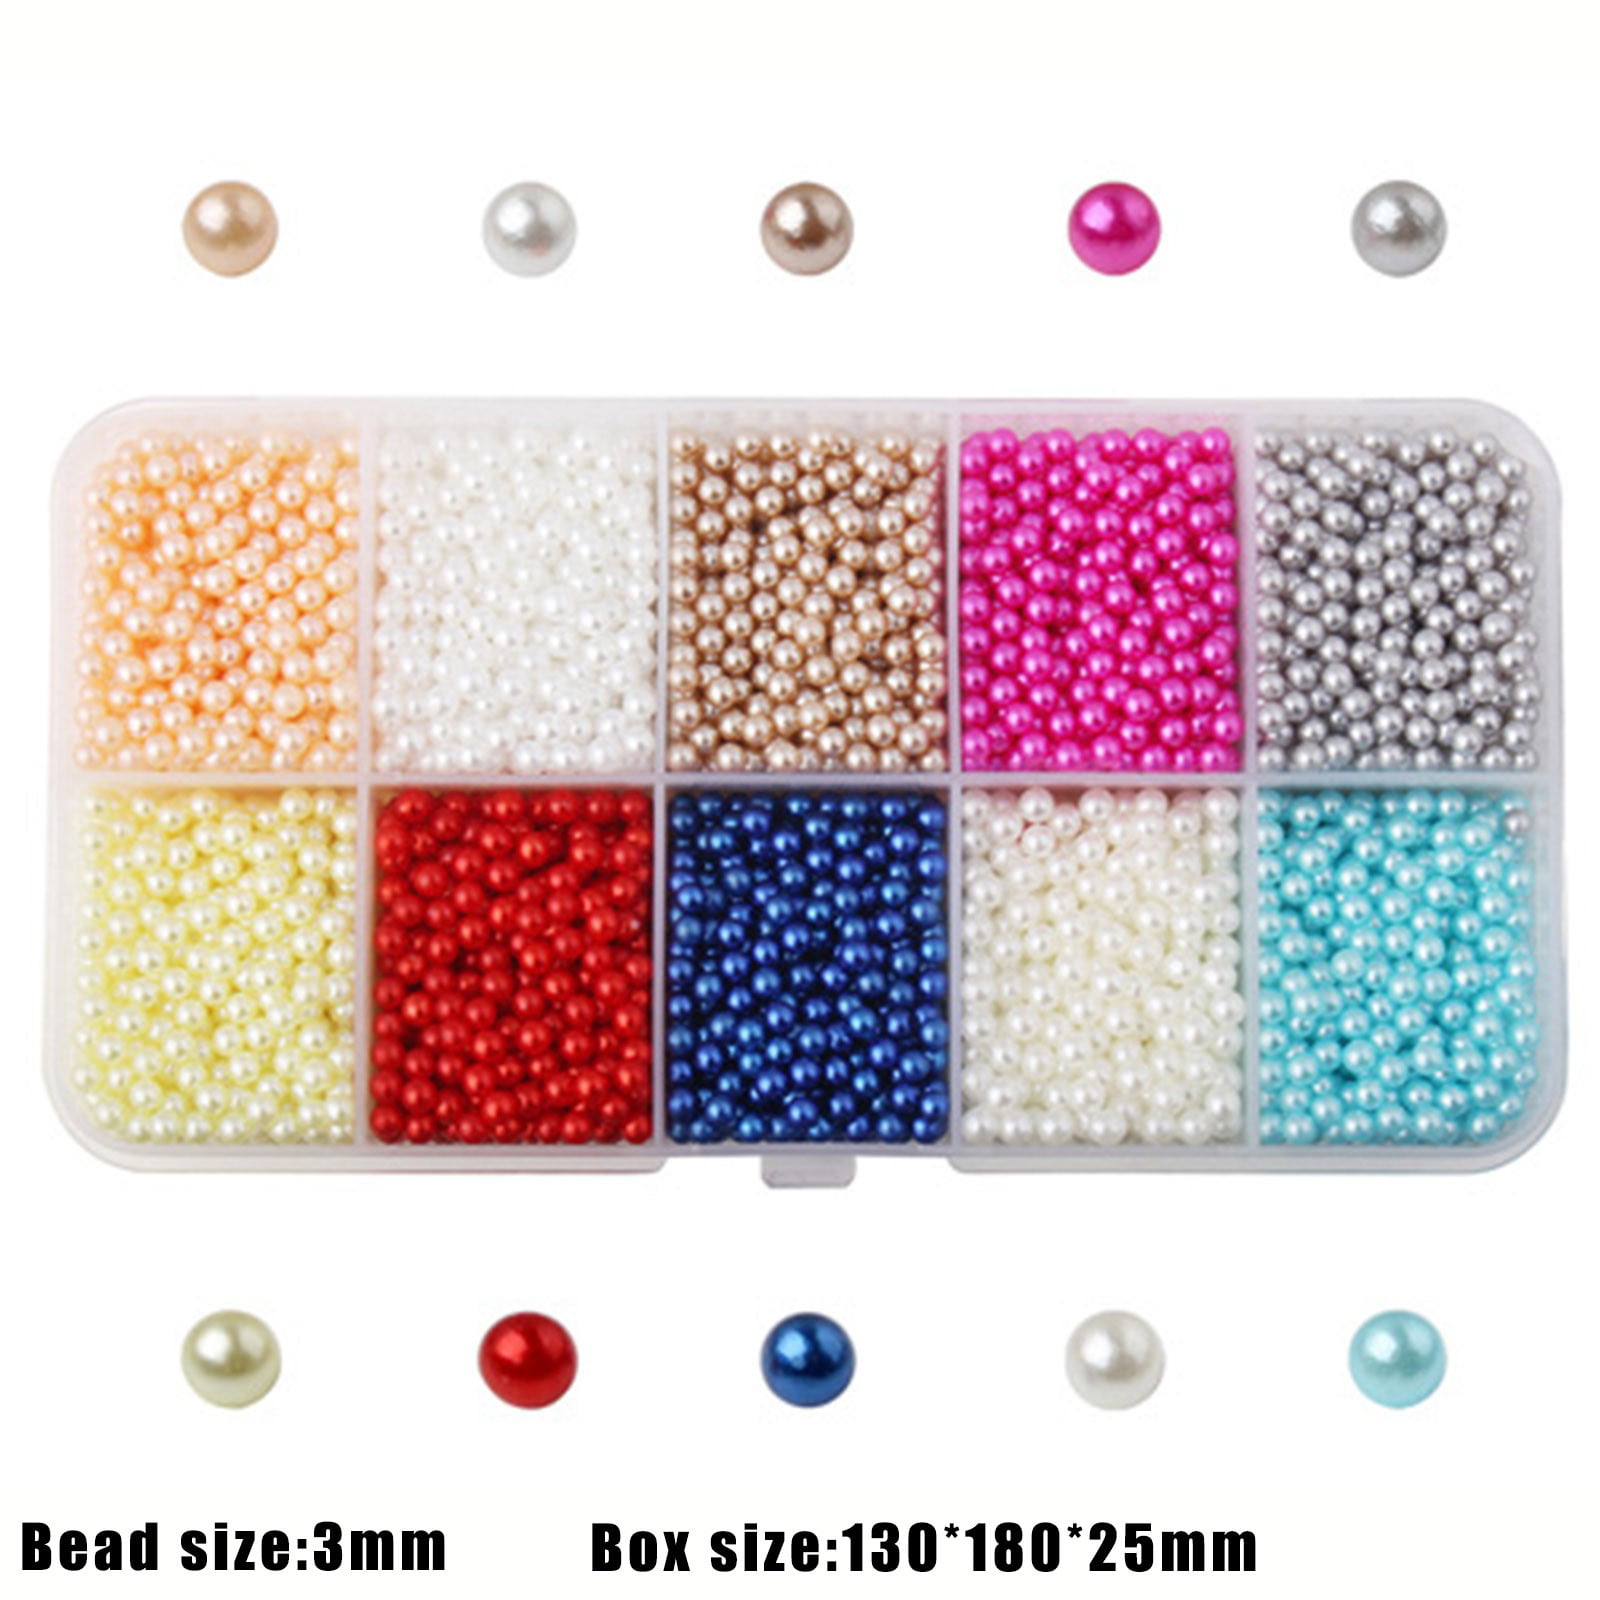  2000 Pieces Pearl Beads for Craft, 4mm Round Loose Fake Pearls  with Hole, Bracelet Pearls for Crafts Jewelry Making Bracelets Necklaces  DIY Hairs Crafts Decoration, Faux Ivory/White,2 Colors